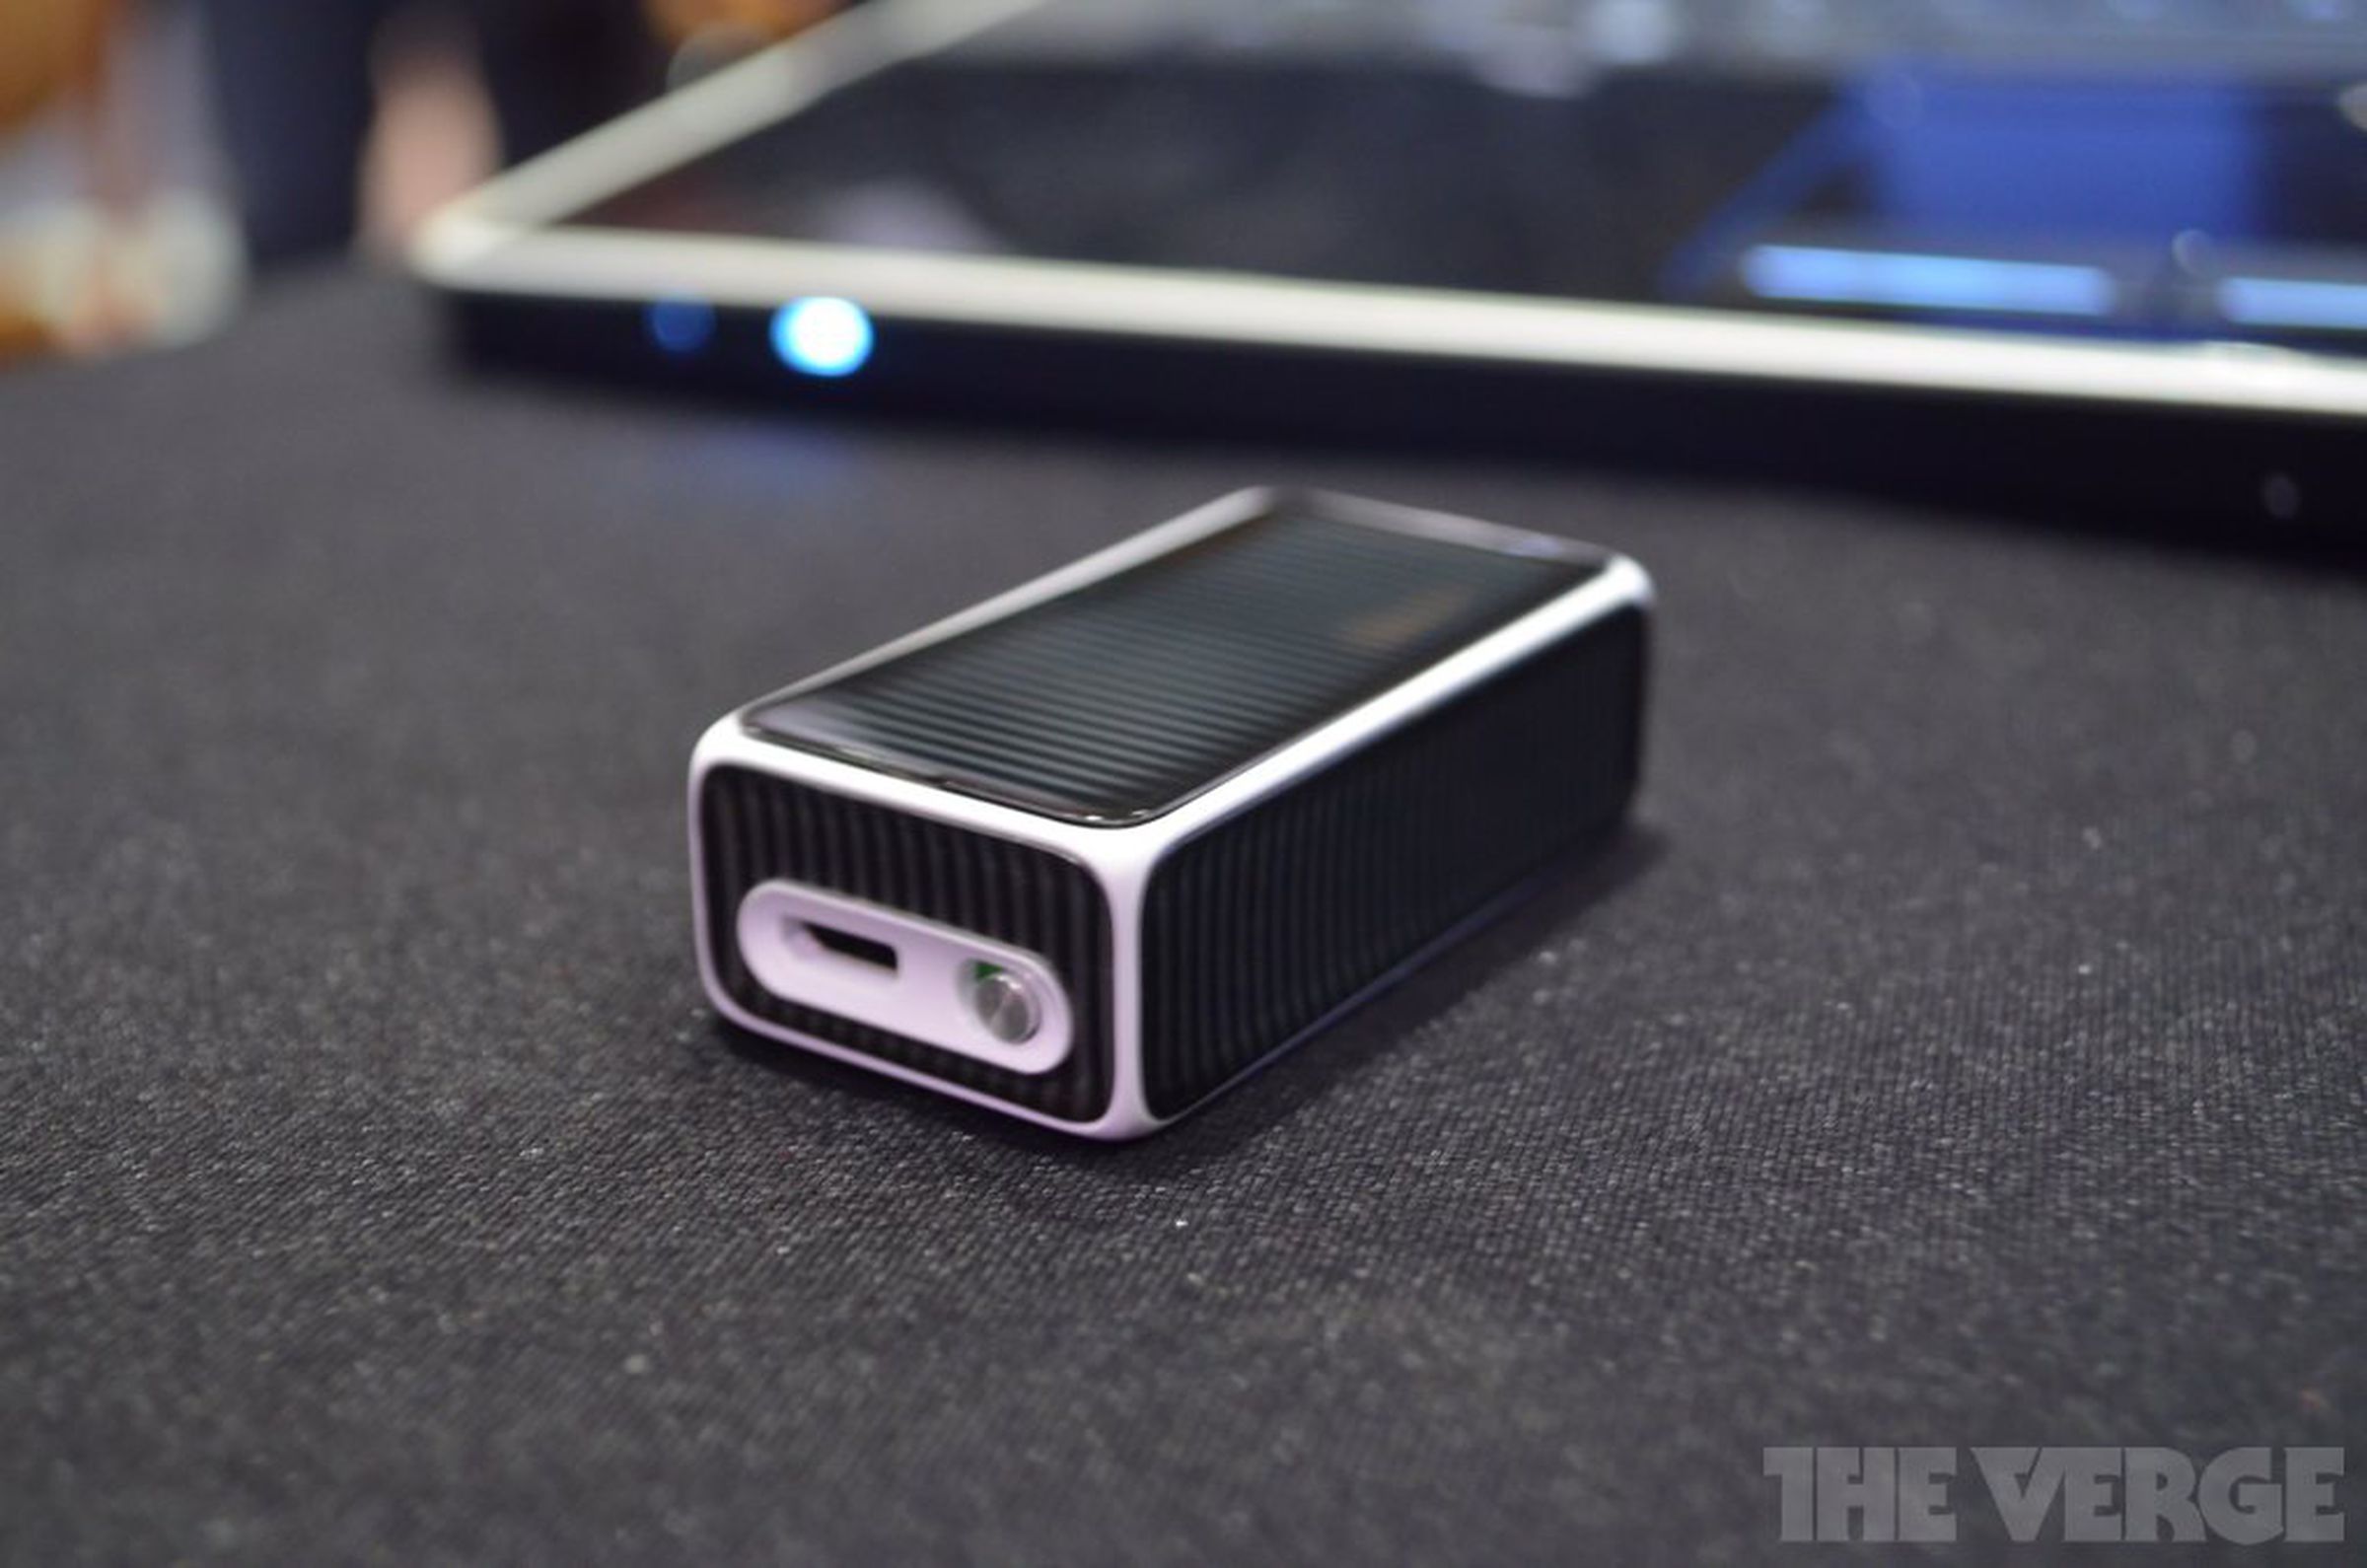 Logitech Cube hands-on pictures